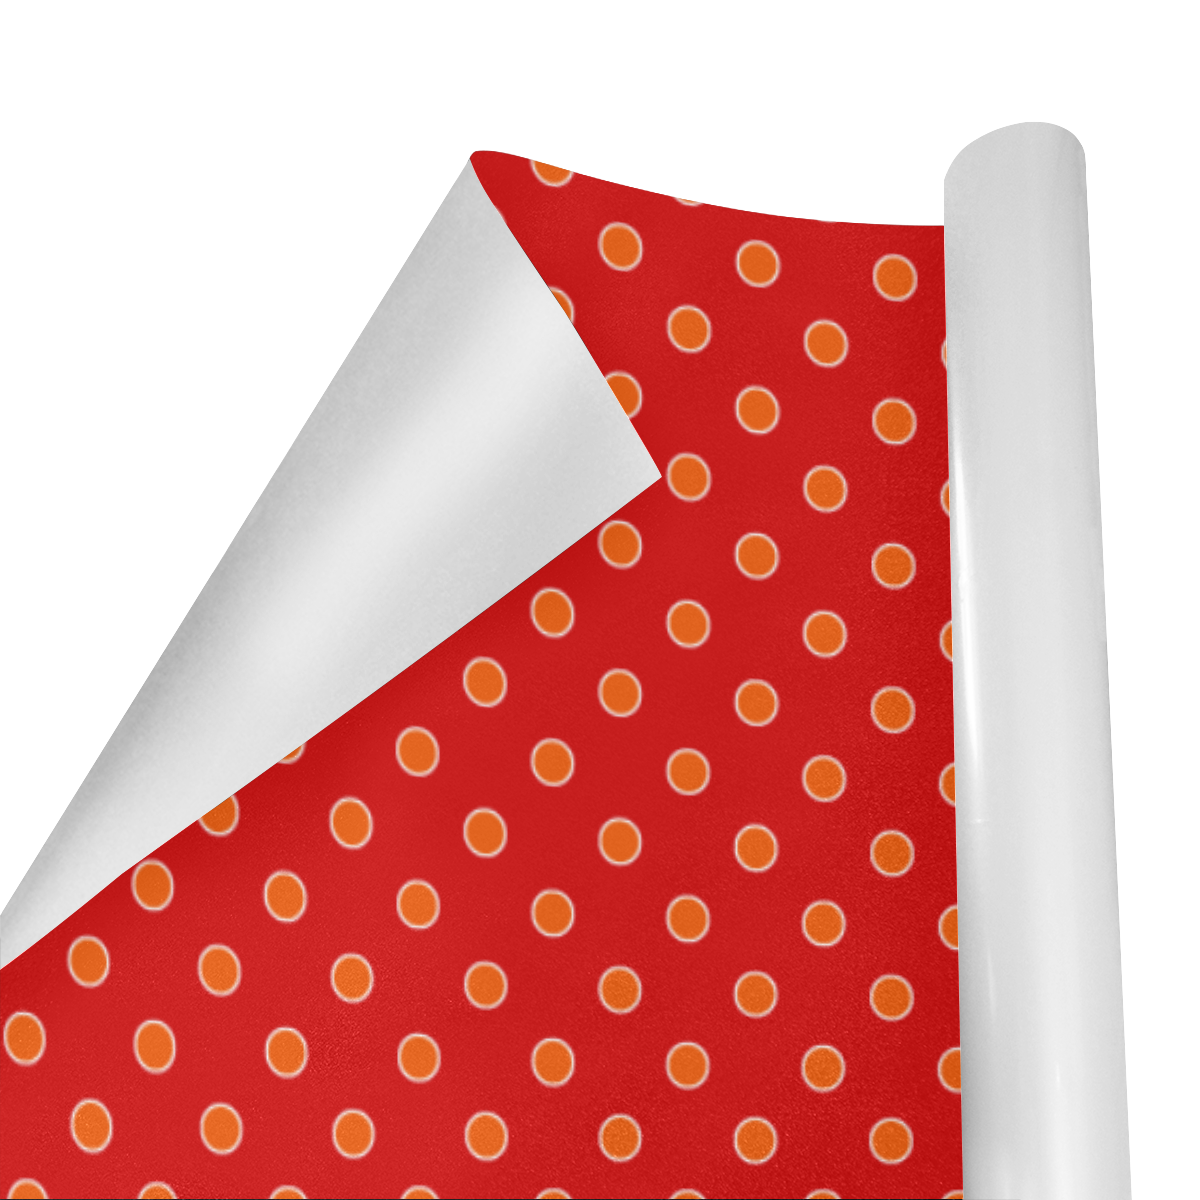 Orange Tangerine Polka Dots on Red Gift Wrapping Paper 58"x 23" (3 Rolls)